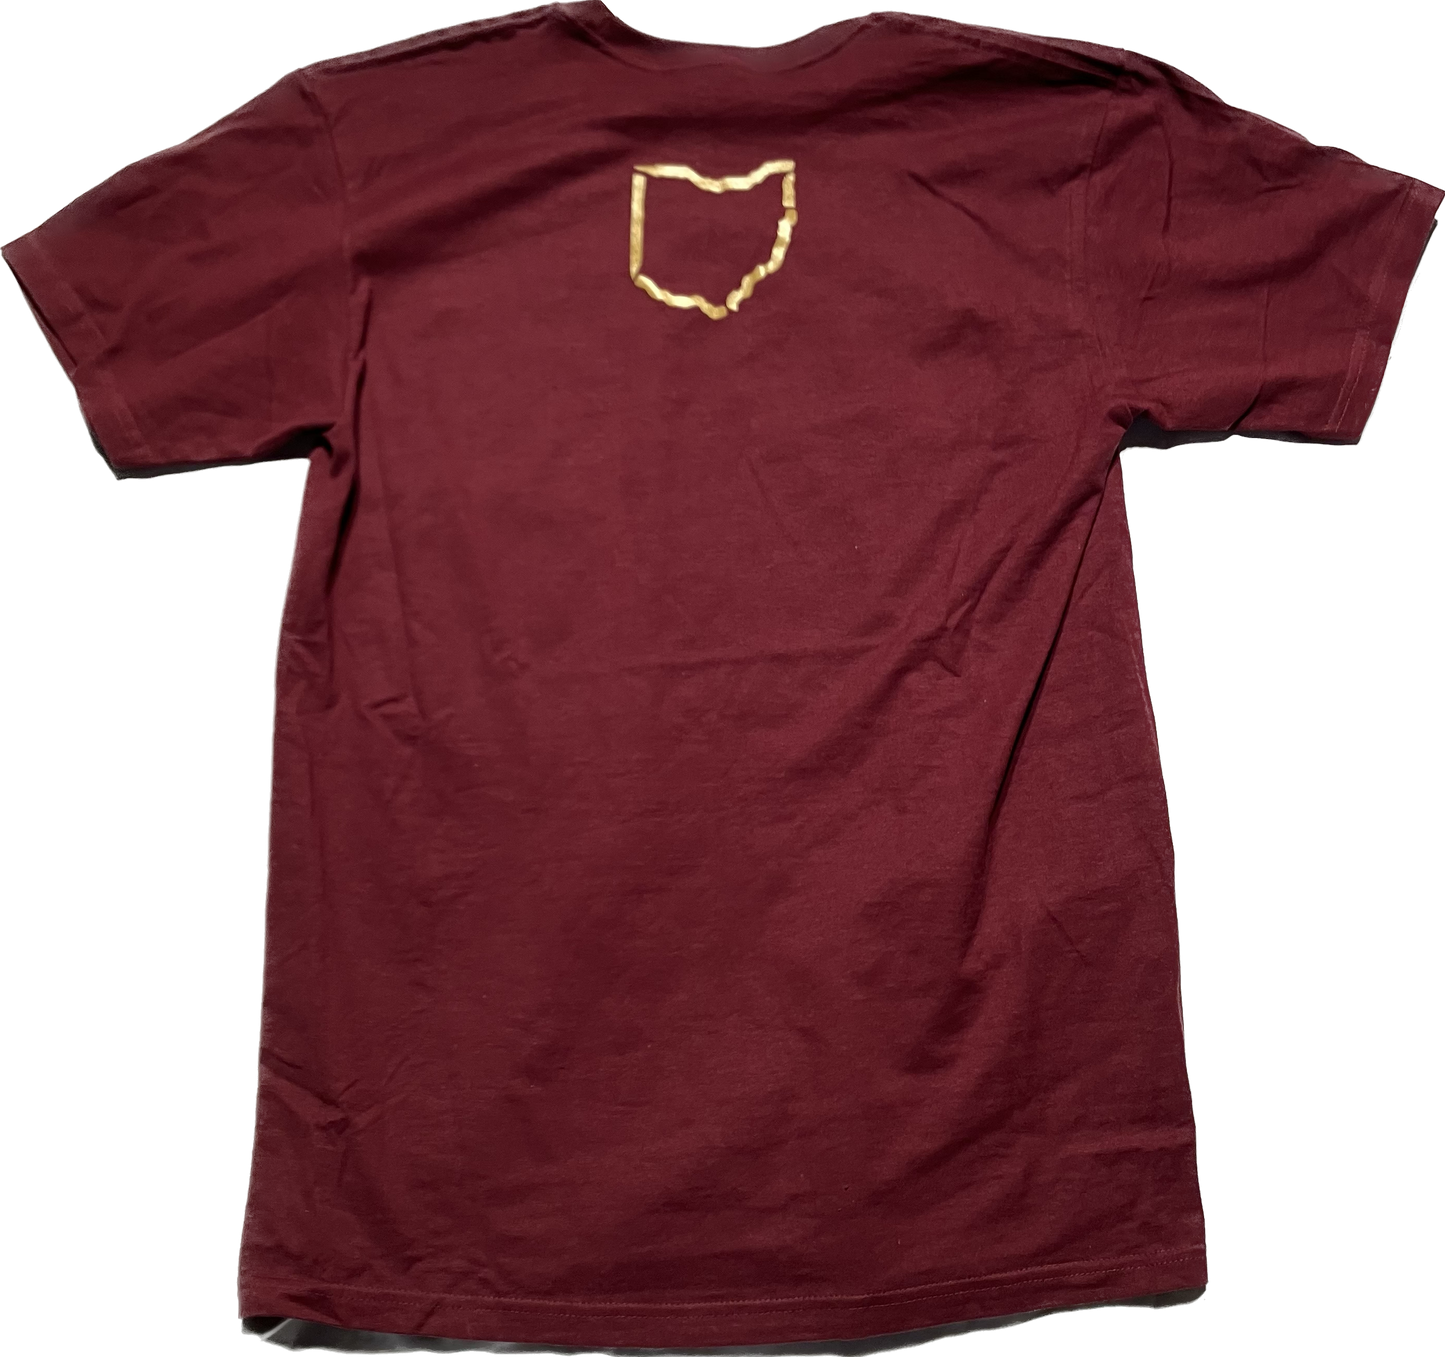 Daybreak Wine and Gold collection T-shirts